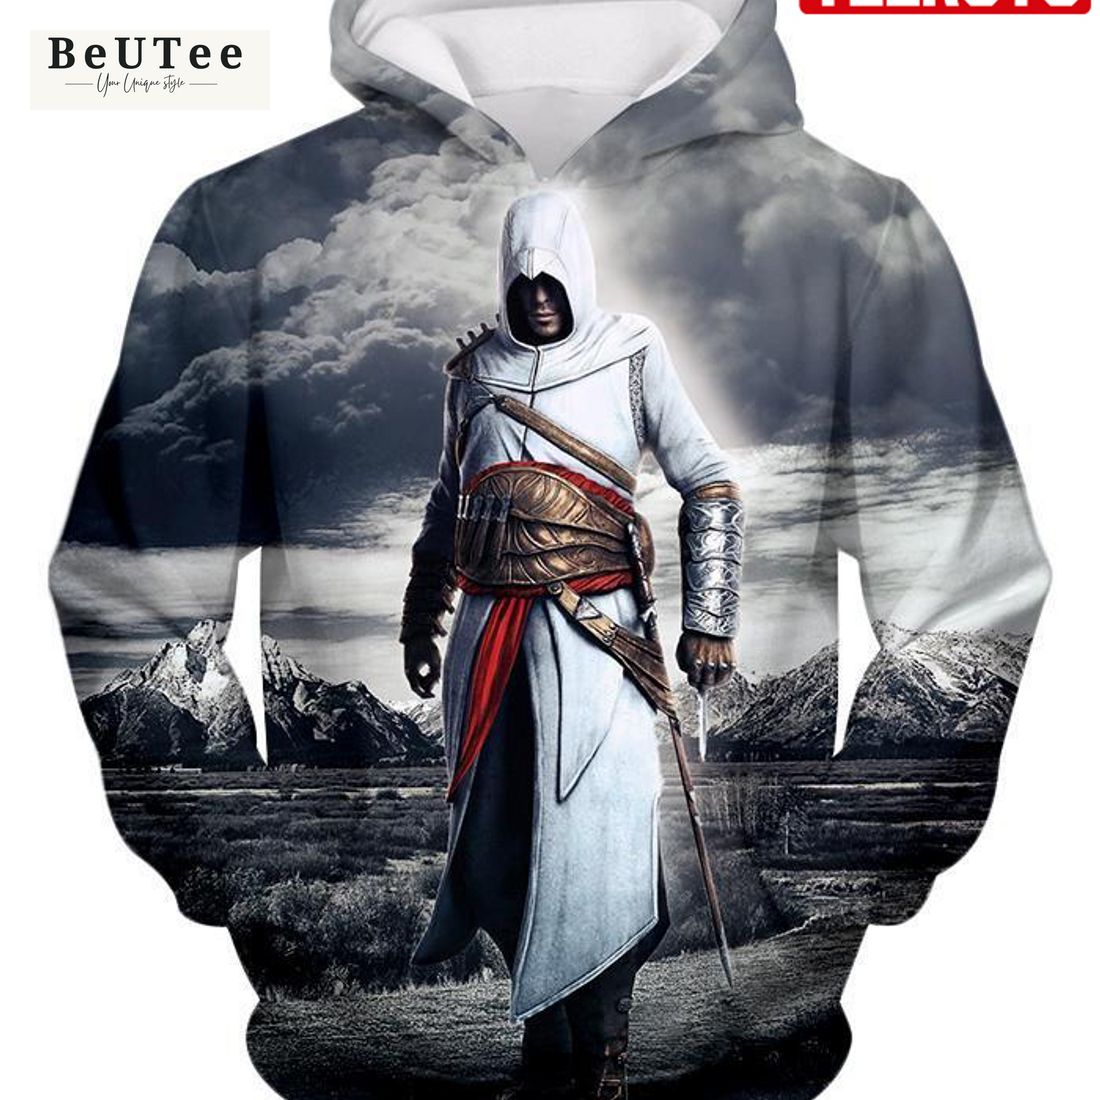 legendary assassin hero altair cool assassin creed promo hd 3d aop hoodie 1 3w8PW